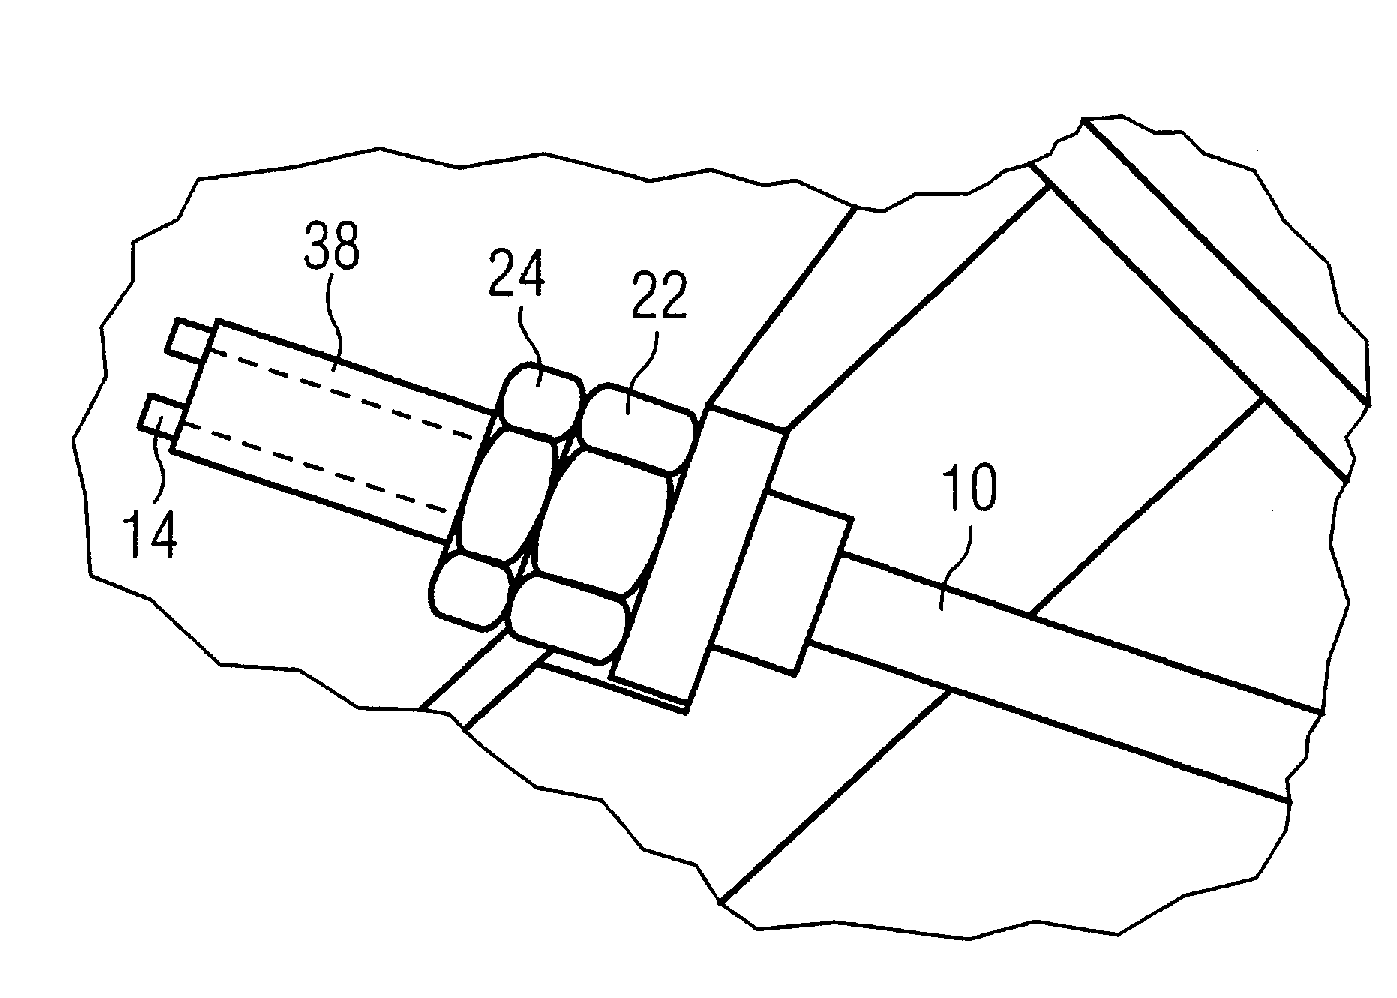 Suspension rod tensioning arrangements for supporting cryogenic equipment within a cryostat